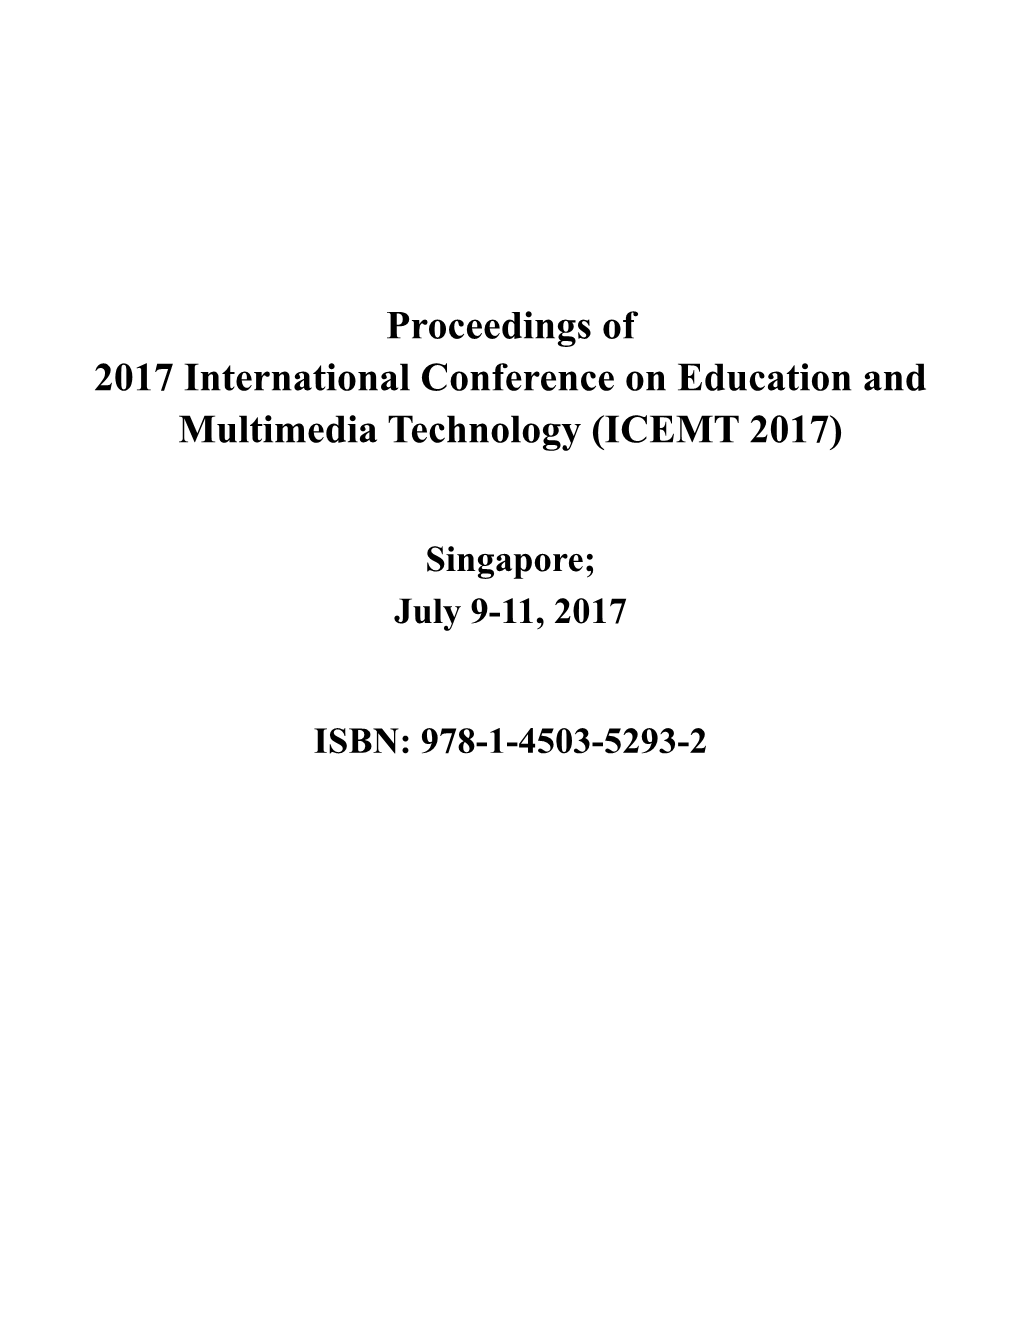 Proceedings of 2017 International Conference on Education and Multimedia Technology (ICEMT 2017)